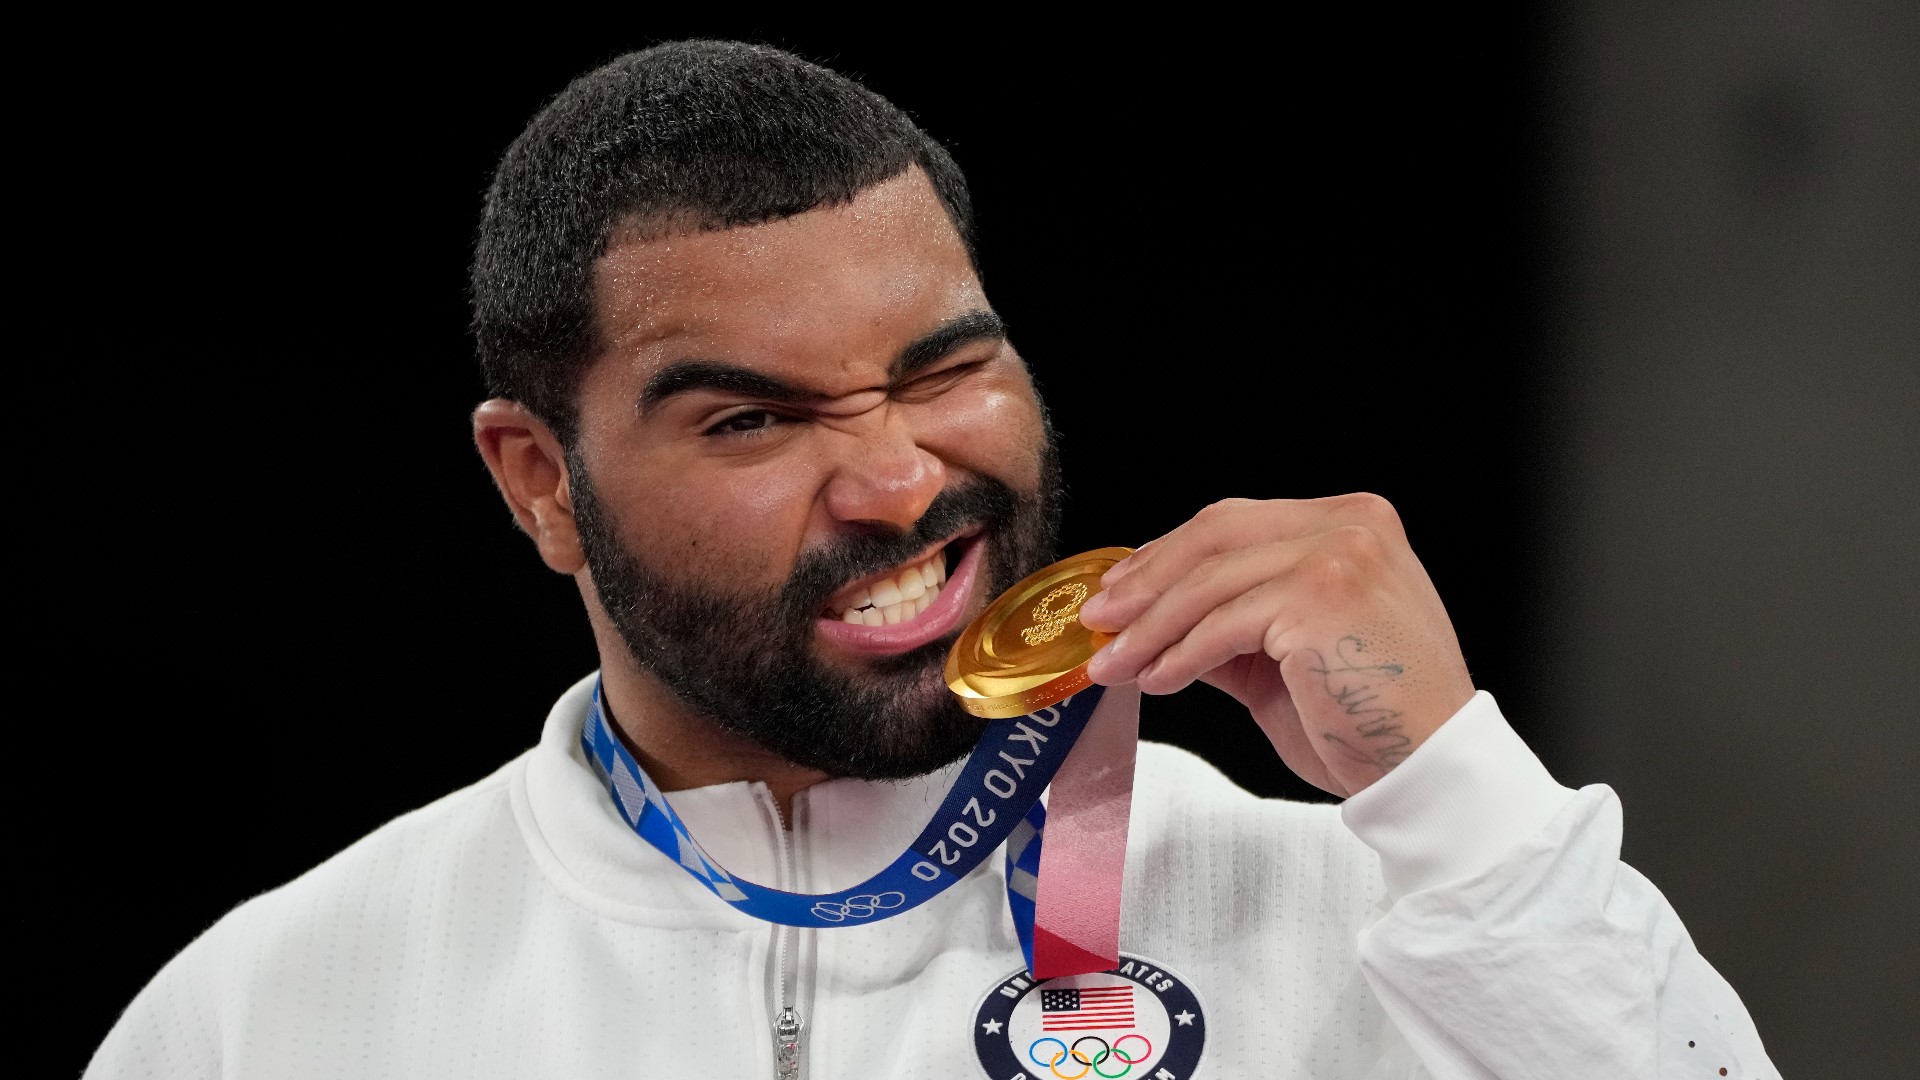 University of Minnesota wrestler Gable Steveson is coming home from the Tokyo Olympics a gold medalist after winning the 125kg freestyle final in the last second.